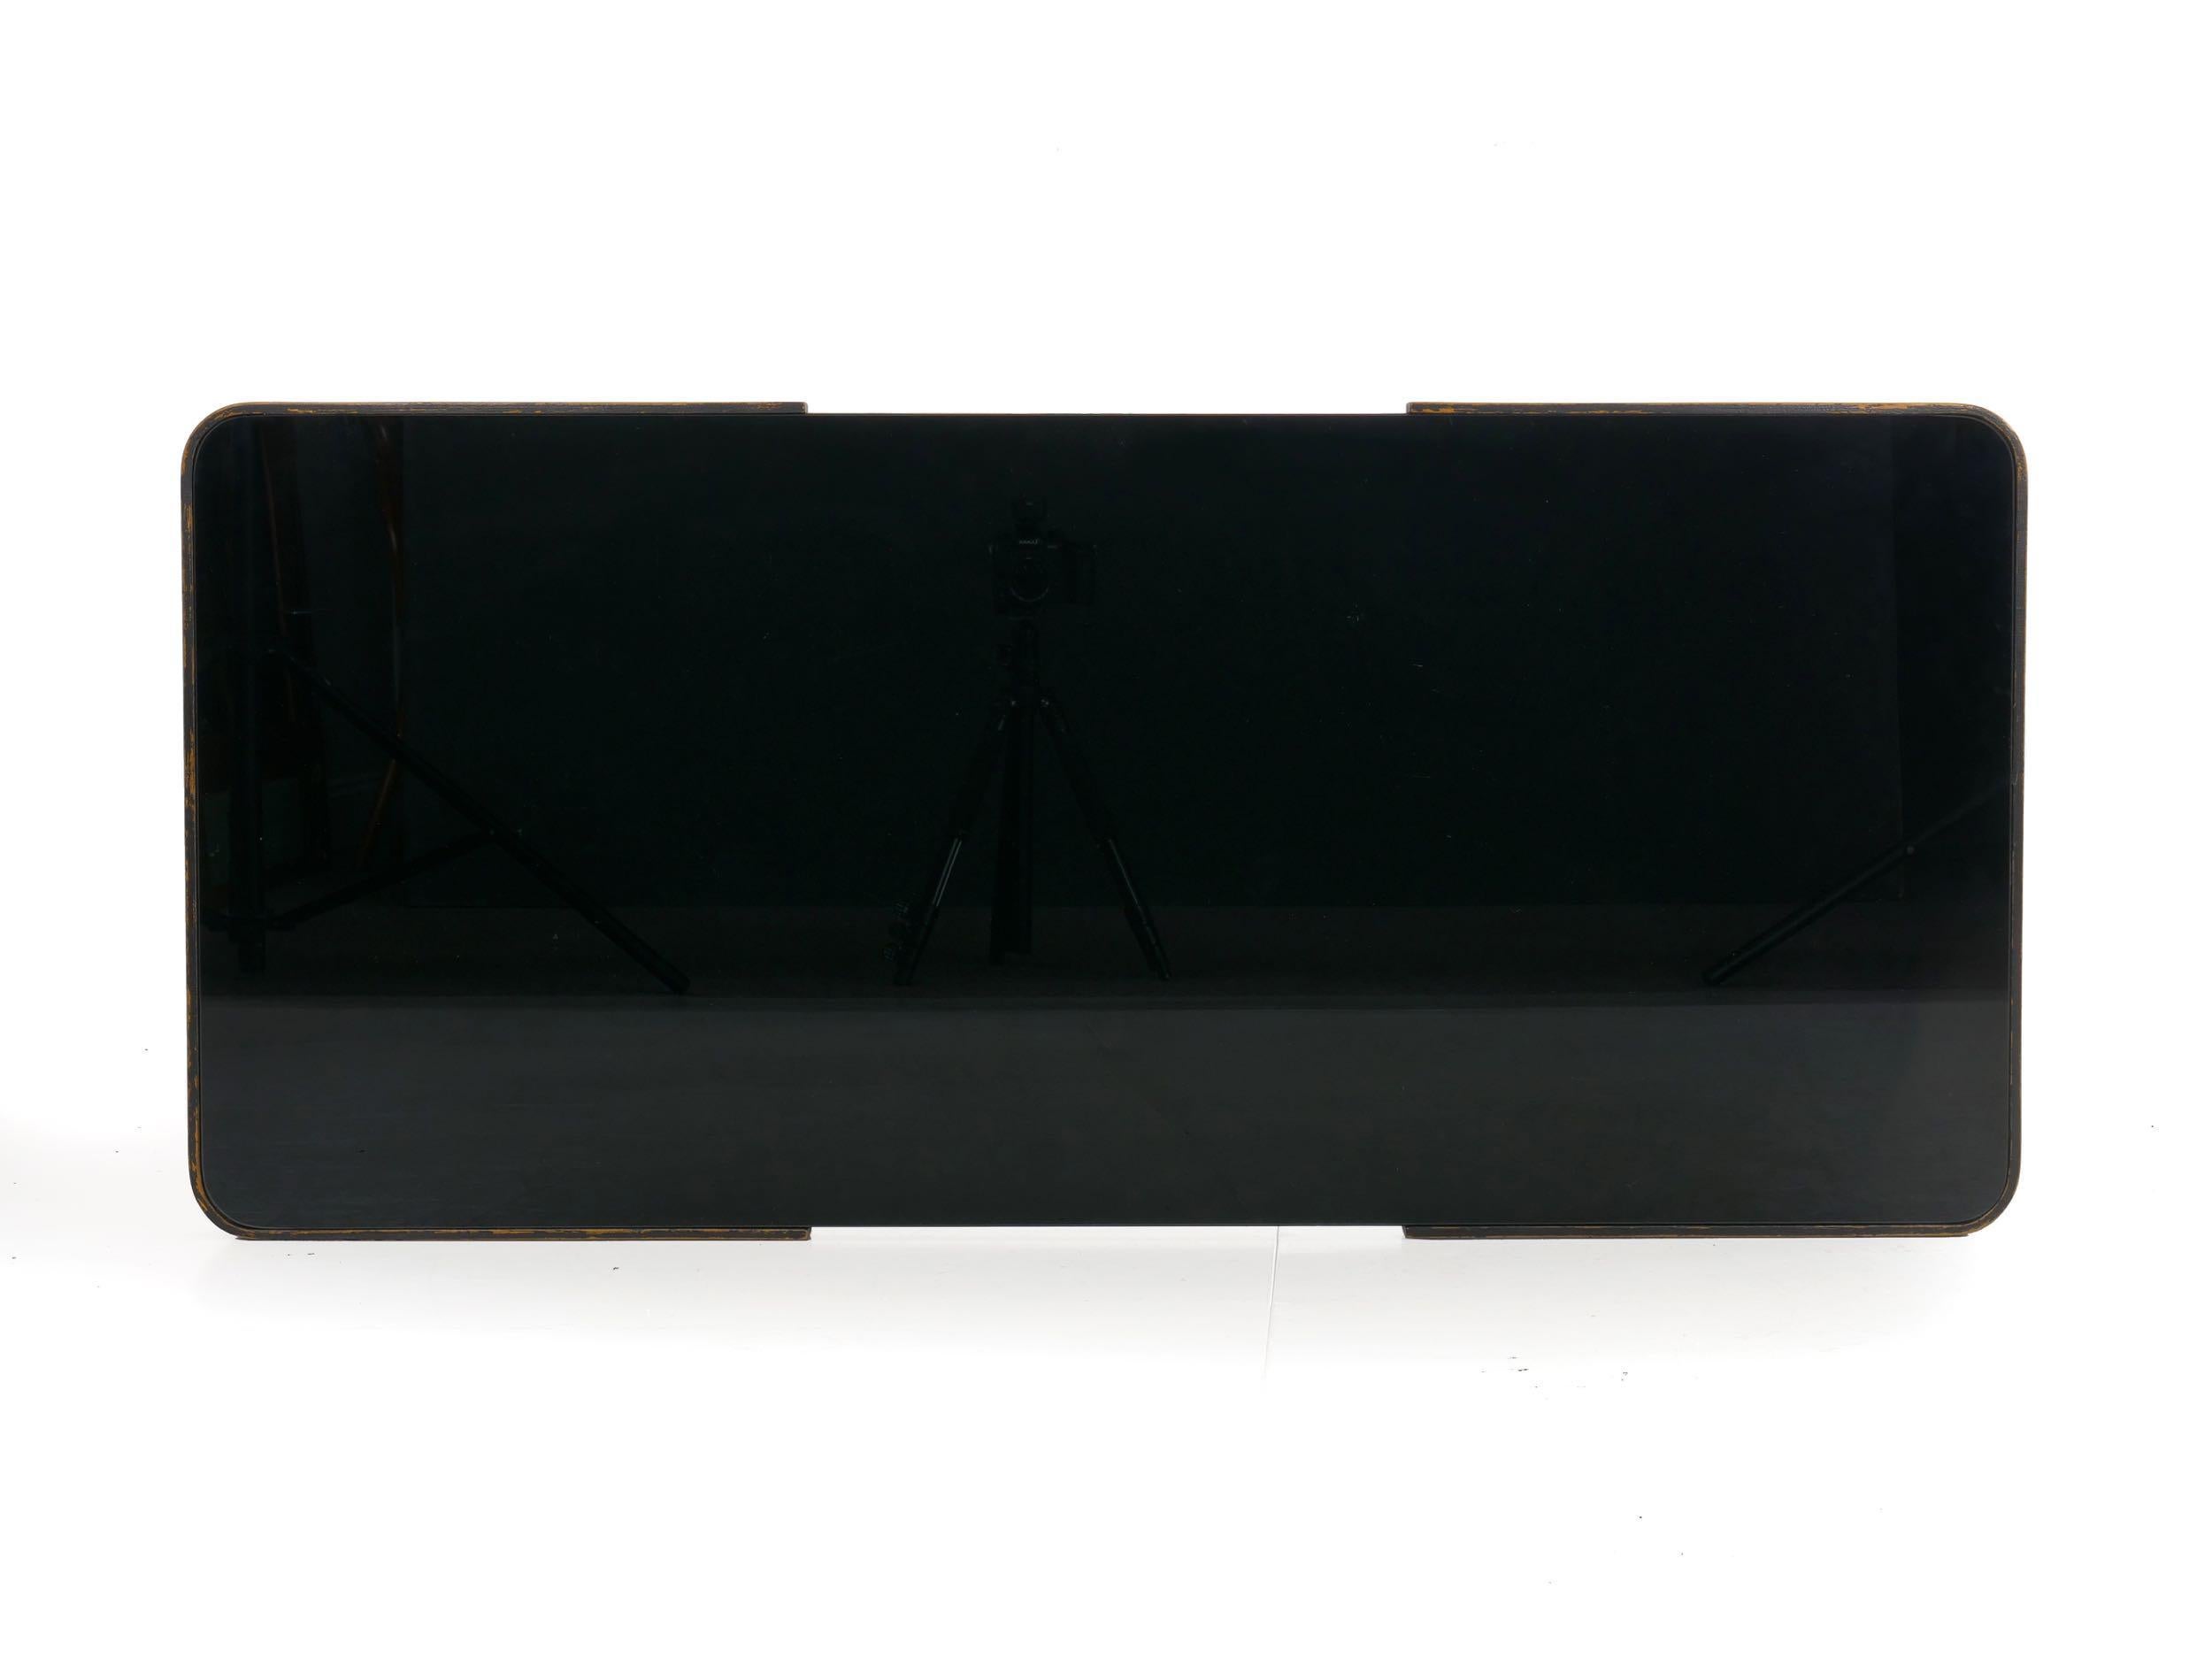 Vintage Ebonized Splay-Leg Cocktail Coffee Table with Black Glass, 20th Century For Sale 3